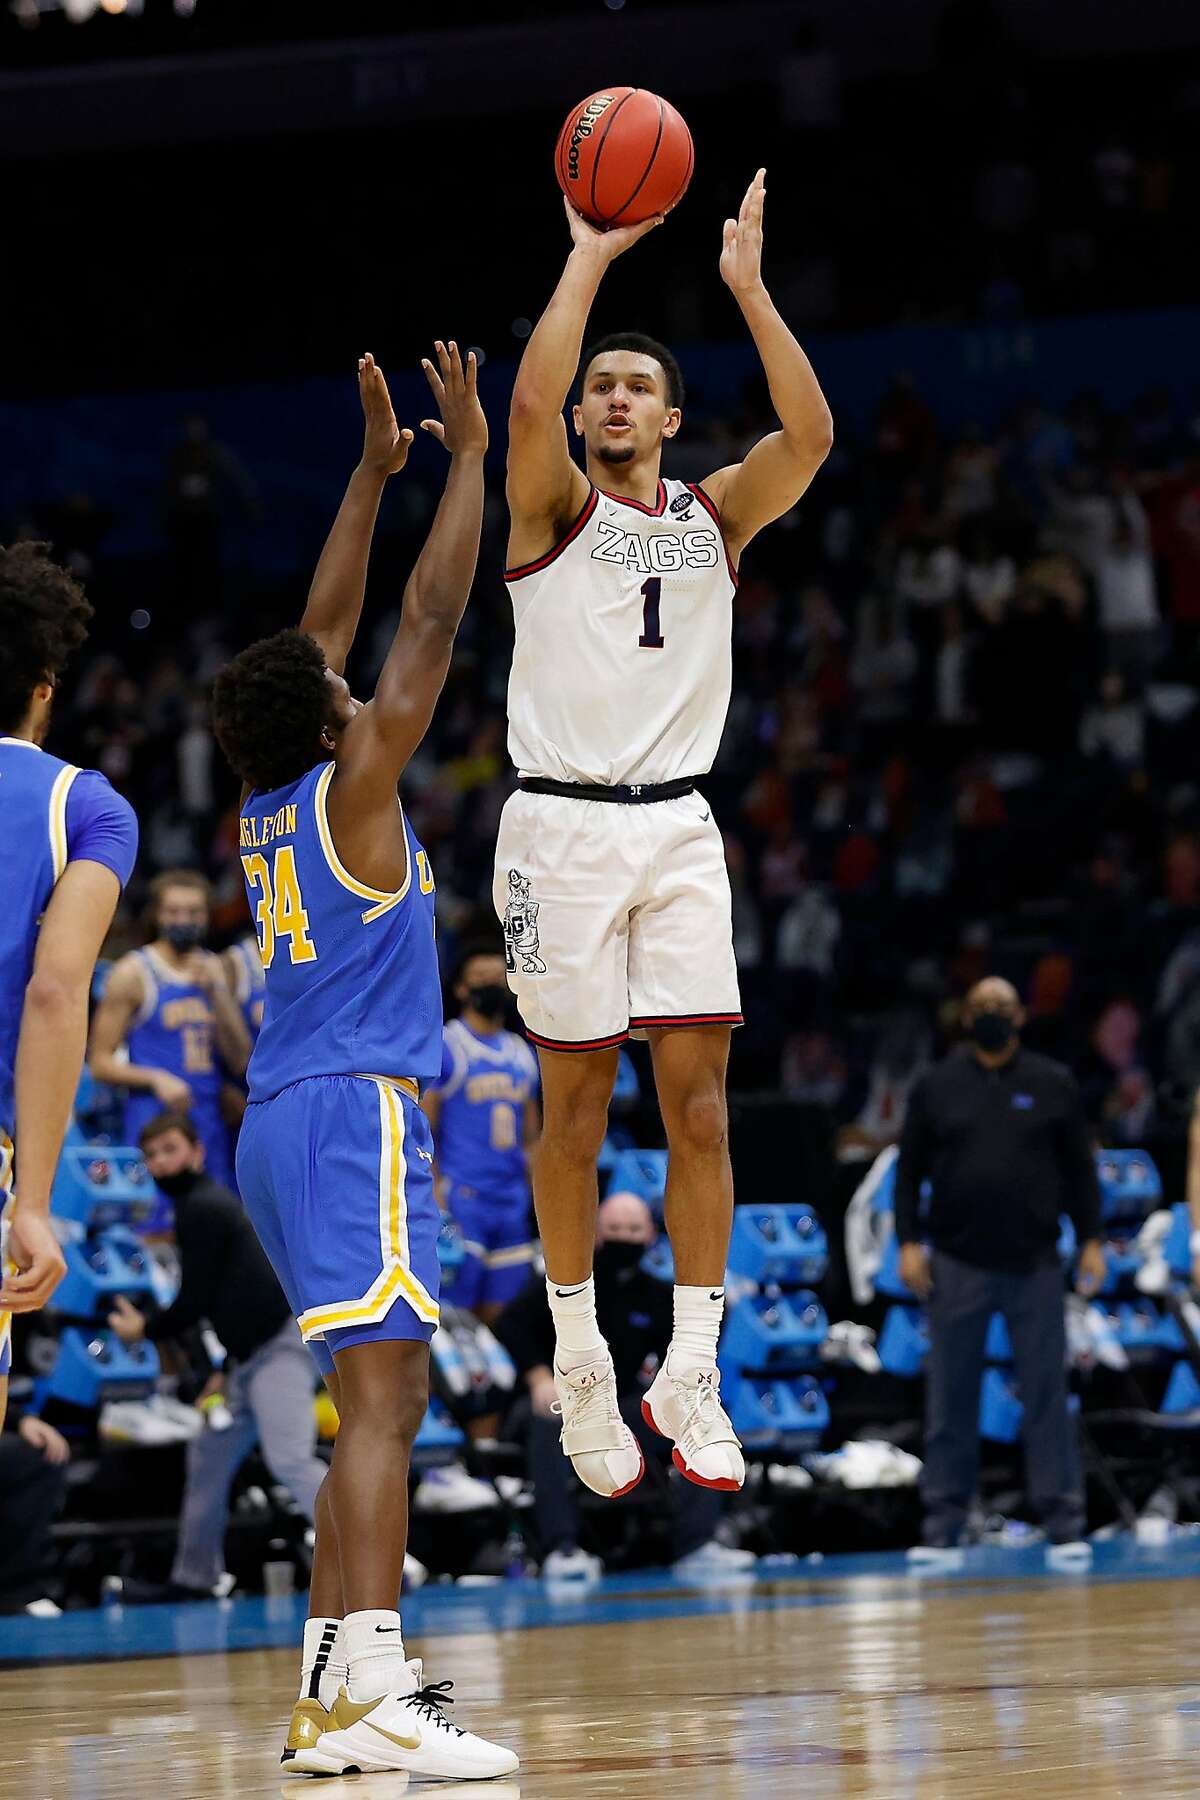 Gonzaga's Jalen Suggs (1) shoots the game-winning 3-point basket in overtime to defeat UCLA, 93-90, in the NCAA Tournament Final Four semifinals at Lucas Oil Stadium in Indianapolis on Saturday.